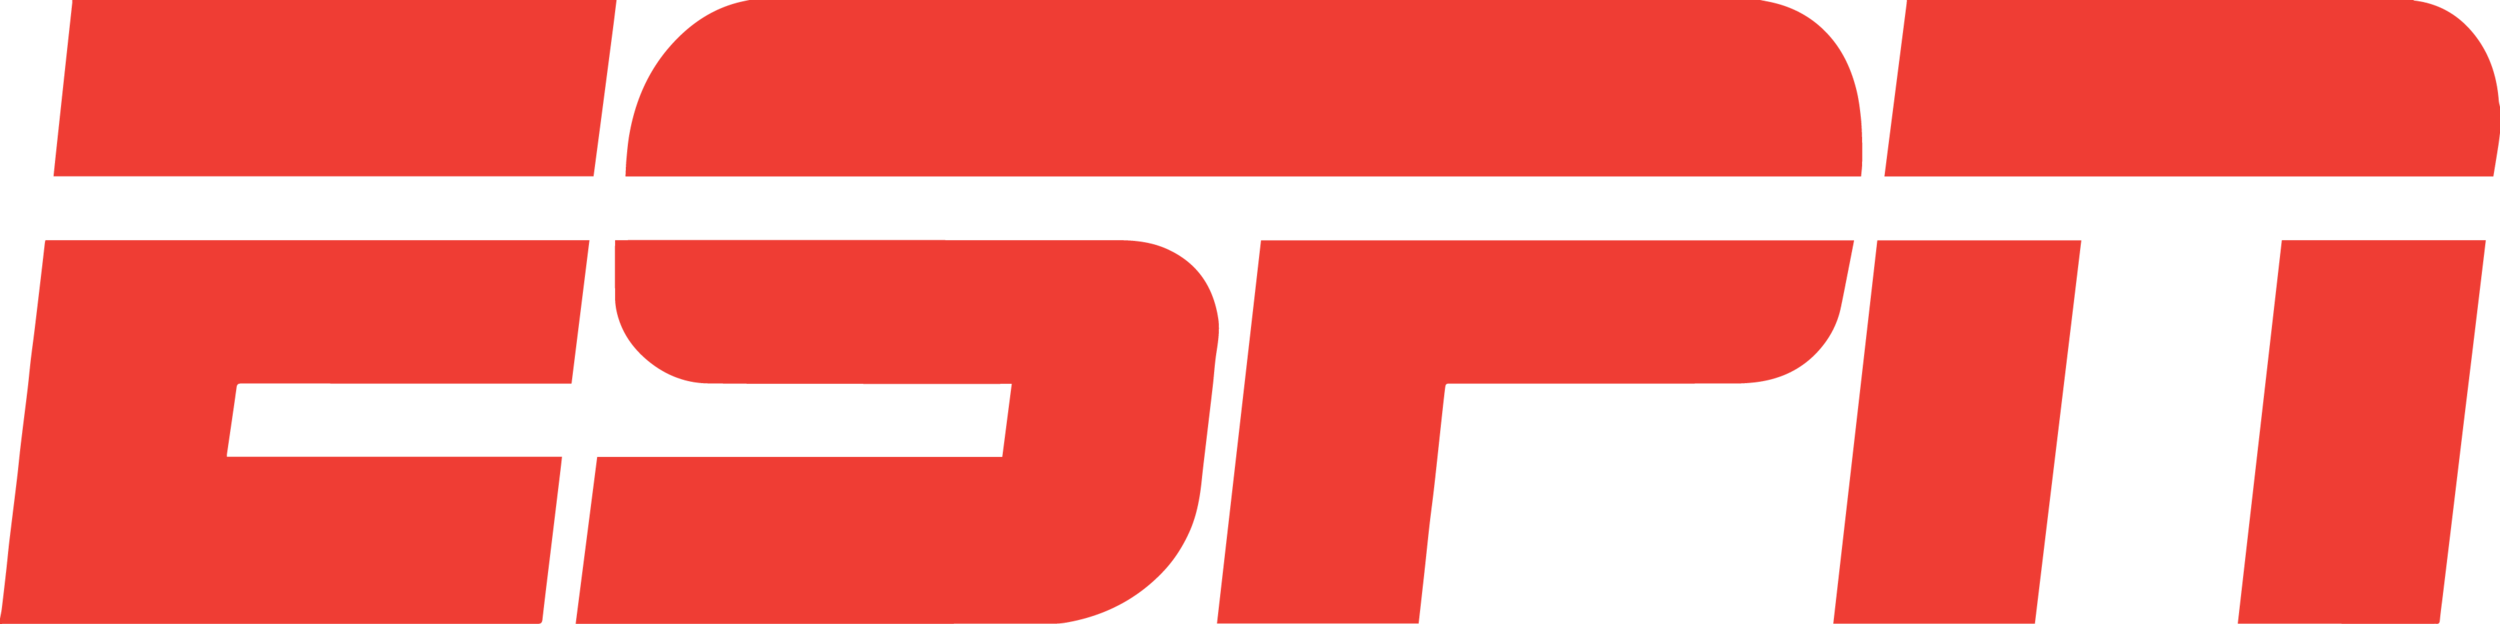 espn_red.png